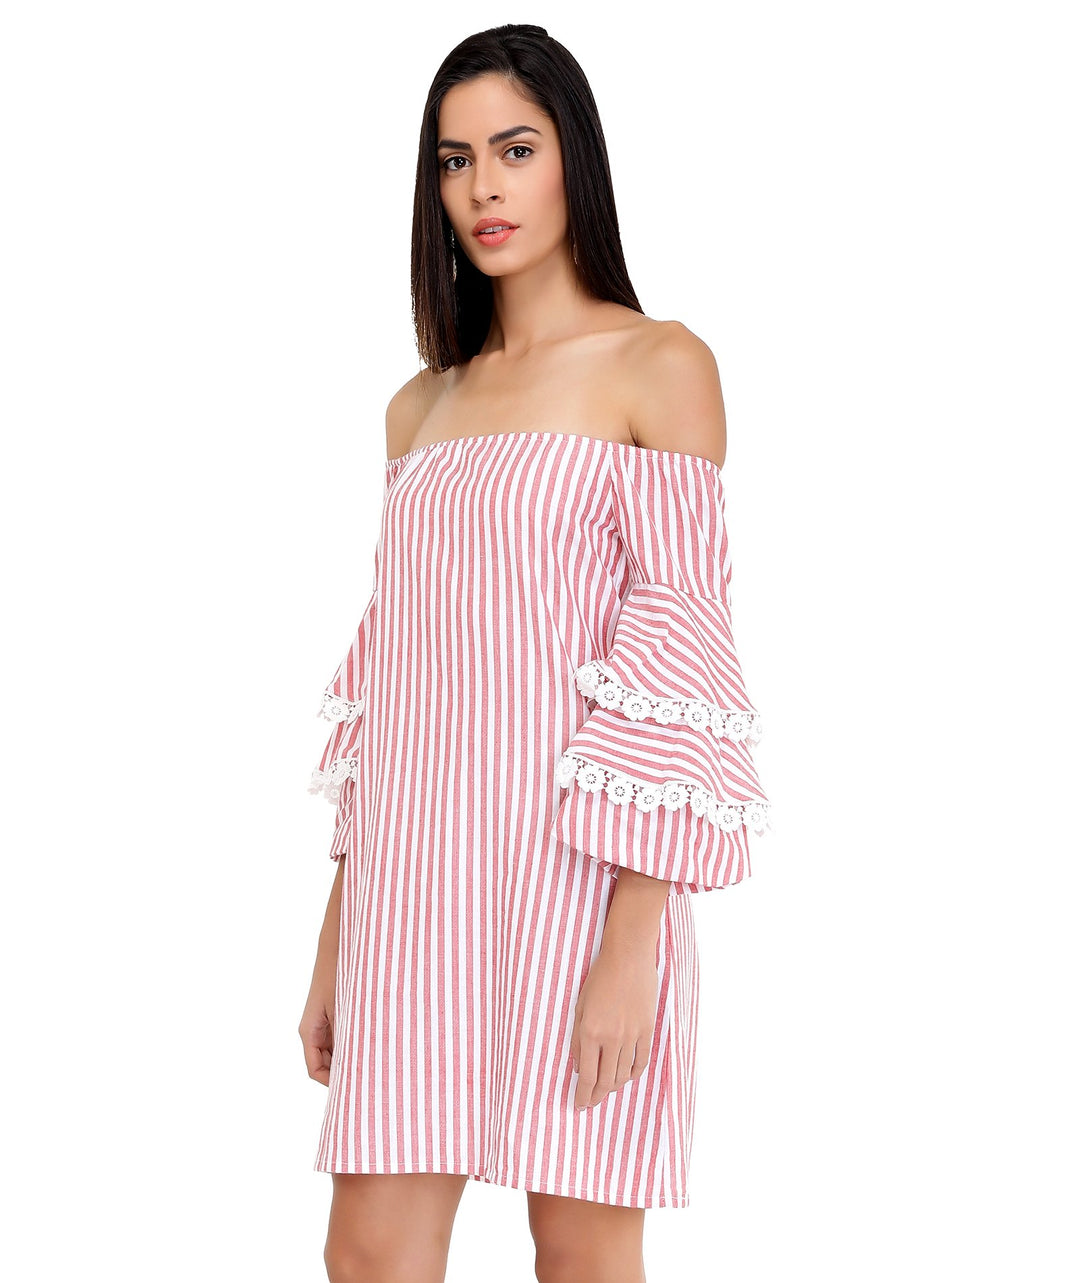 Candy Bardot Dress with Statement Sleeves